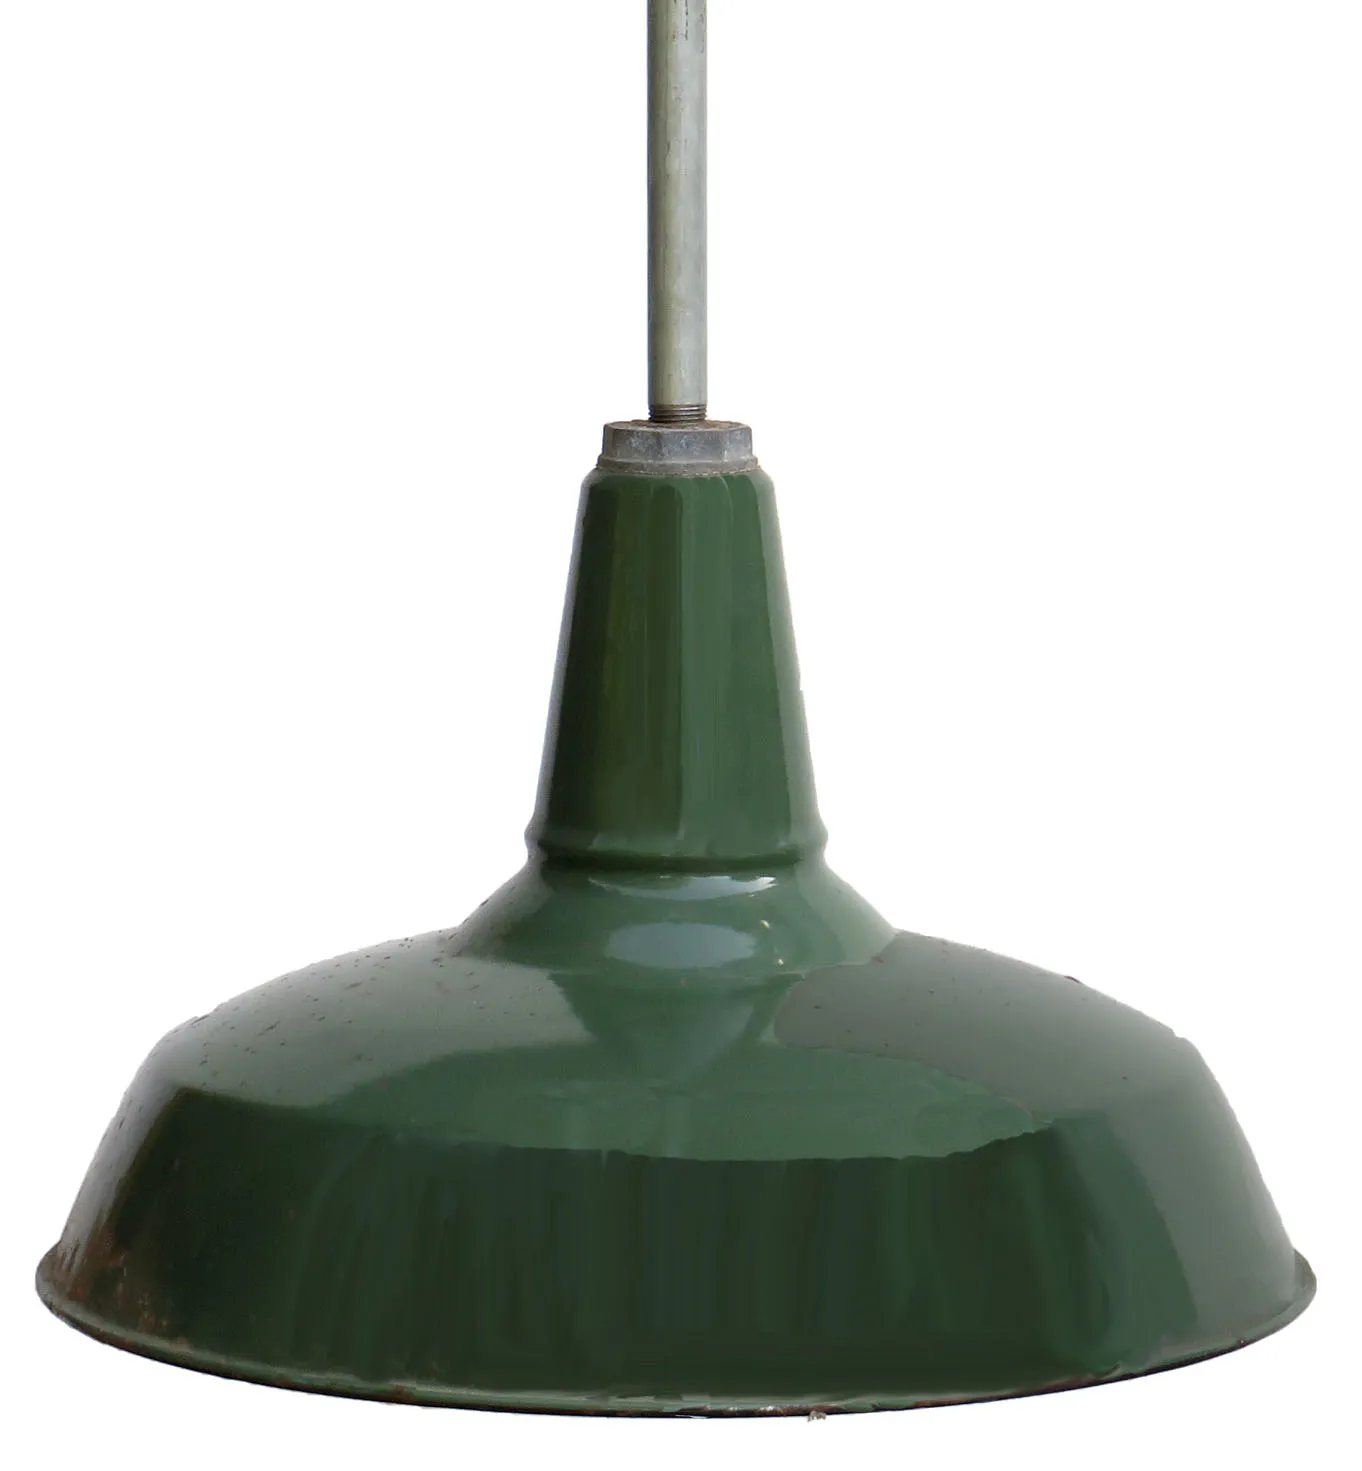 Vintage Industrial Light - Green Shade - Chez Vous